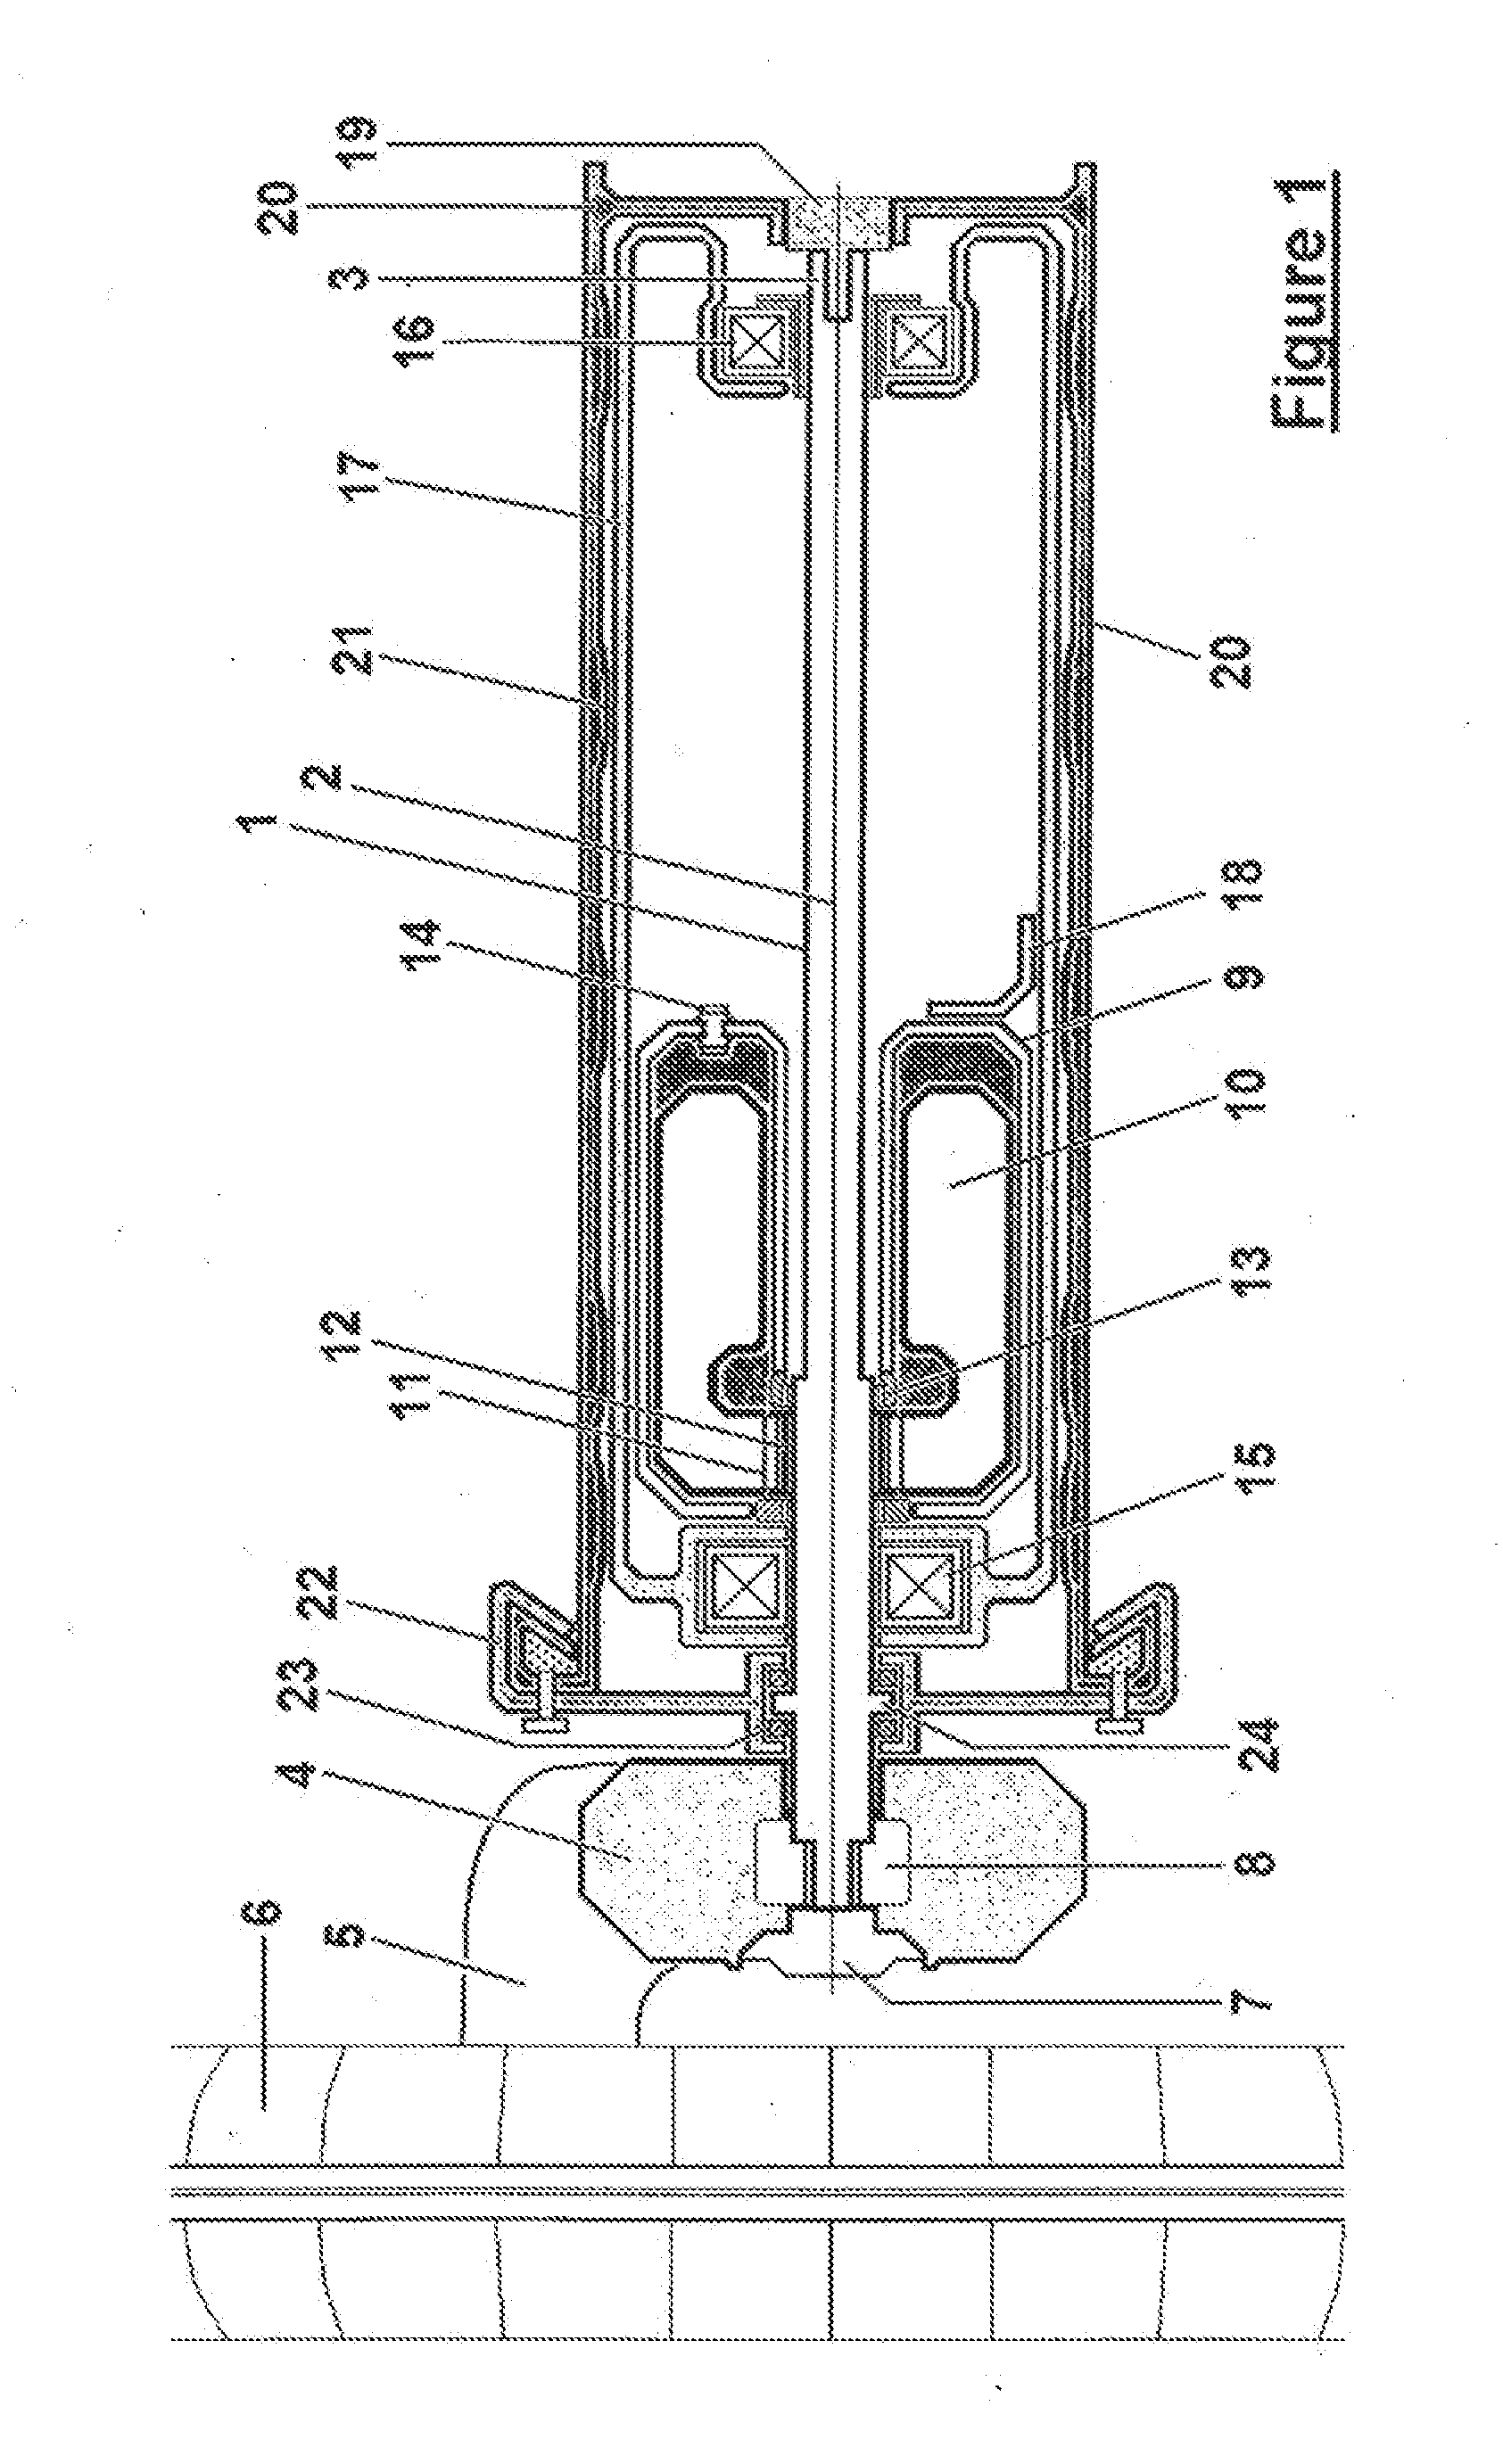 Parametric chassis system for vehicles, comprising four suspension elements, incorporating a lateral torsion bar and co-axial damper unit, in a box-module, that allows central location of heavy items, such as batteries